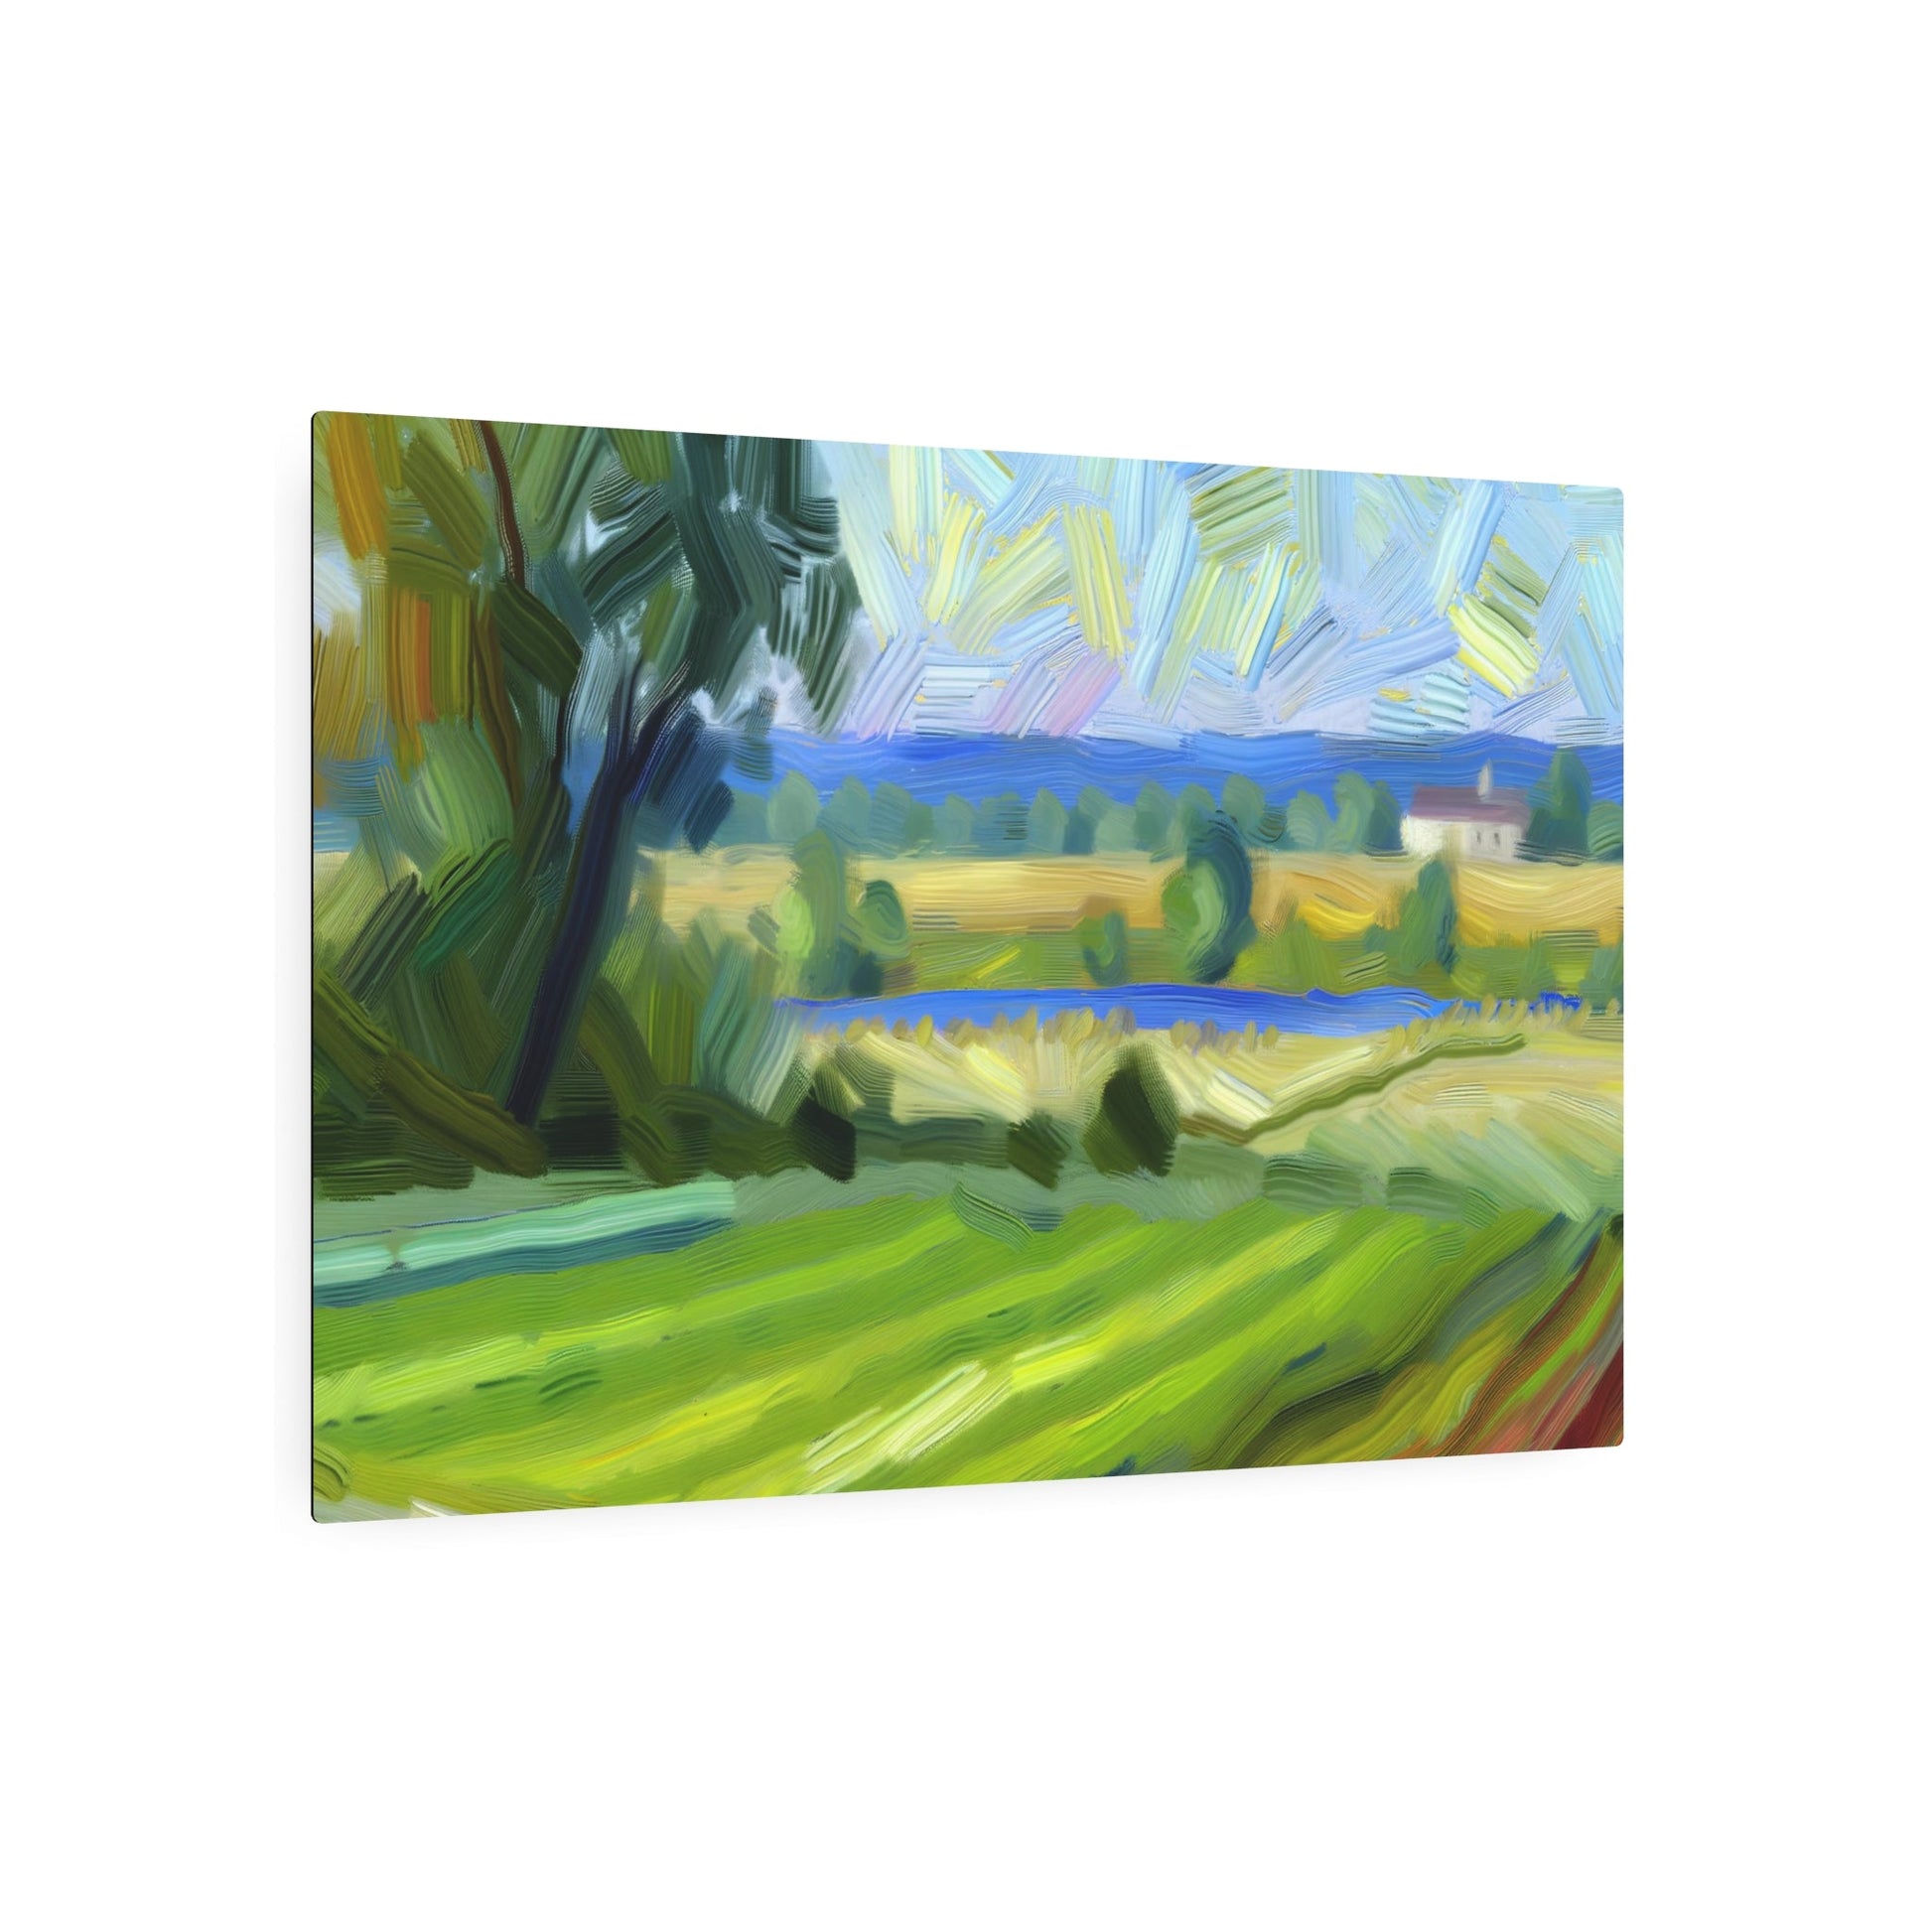 Metal Poster Art | "Impressionist Countryside Landscape Artwork - Vibrant Colors, Visible Brush Strokes, Light & Movement - Dalle-3 Generated Western Style - Metal Poster Art 36″ x 24″ (Horizontal) 0.12''